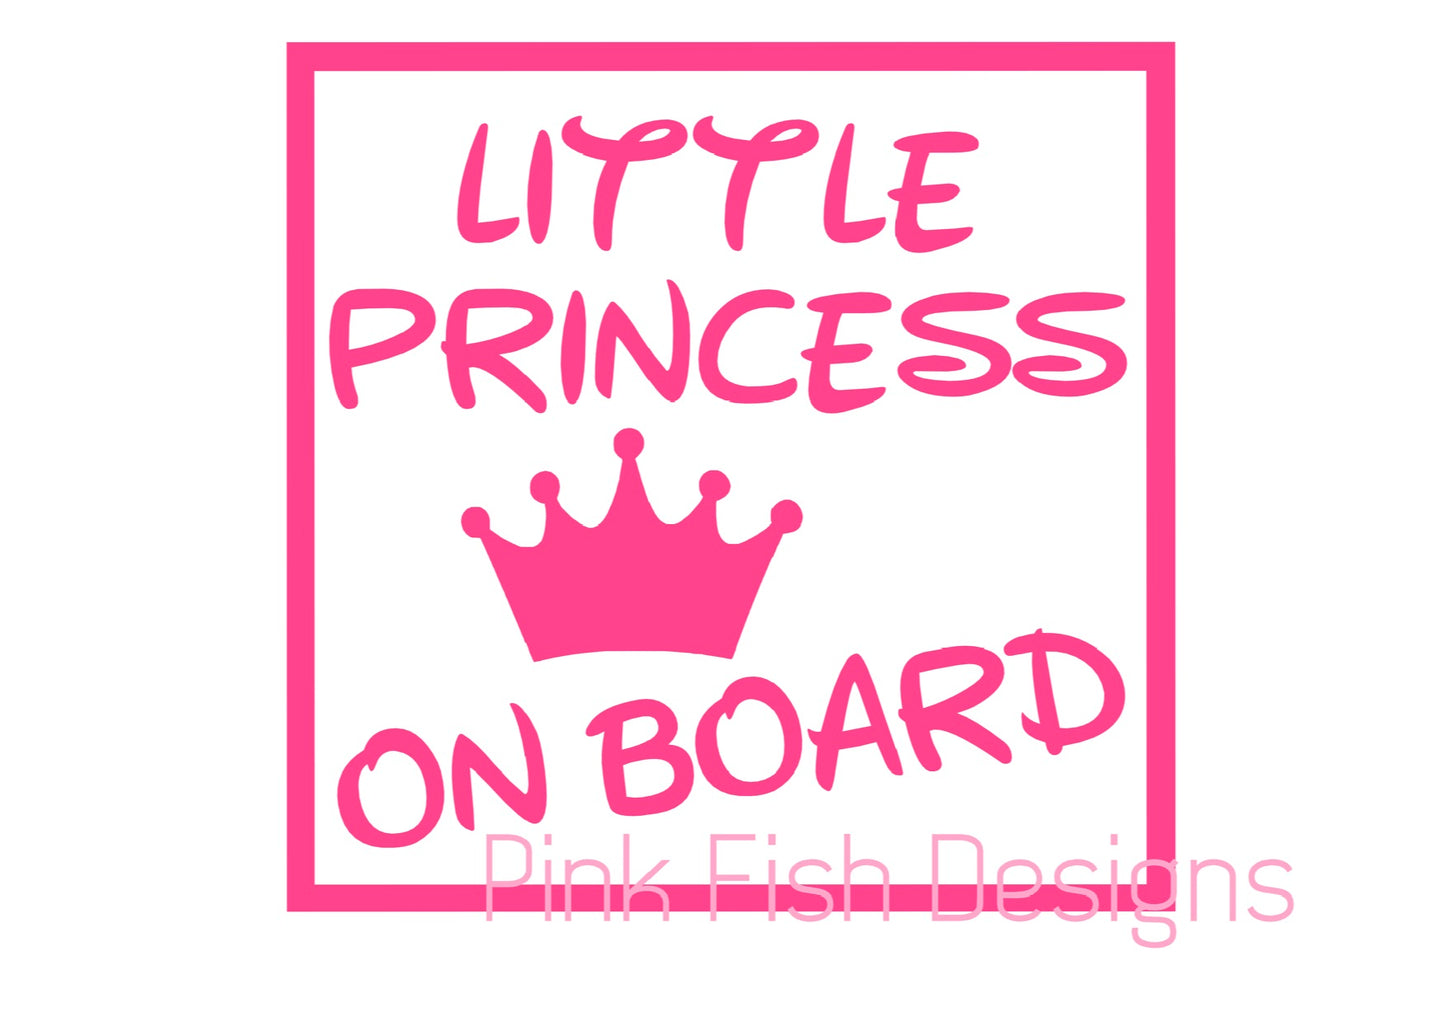 LITTLE PRINCESS ON BOARD SIGN